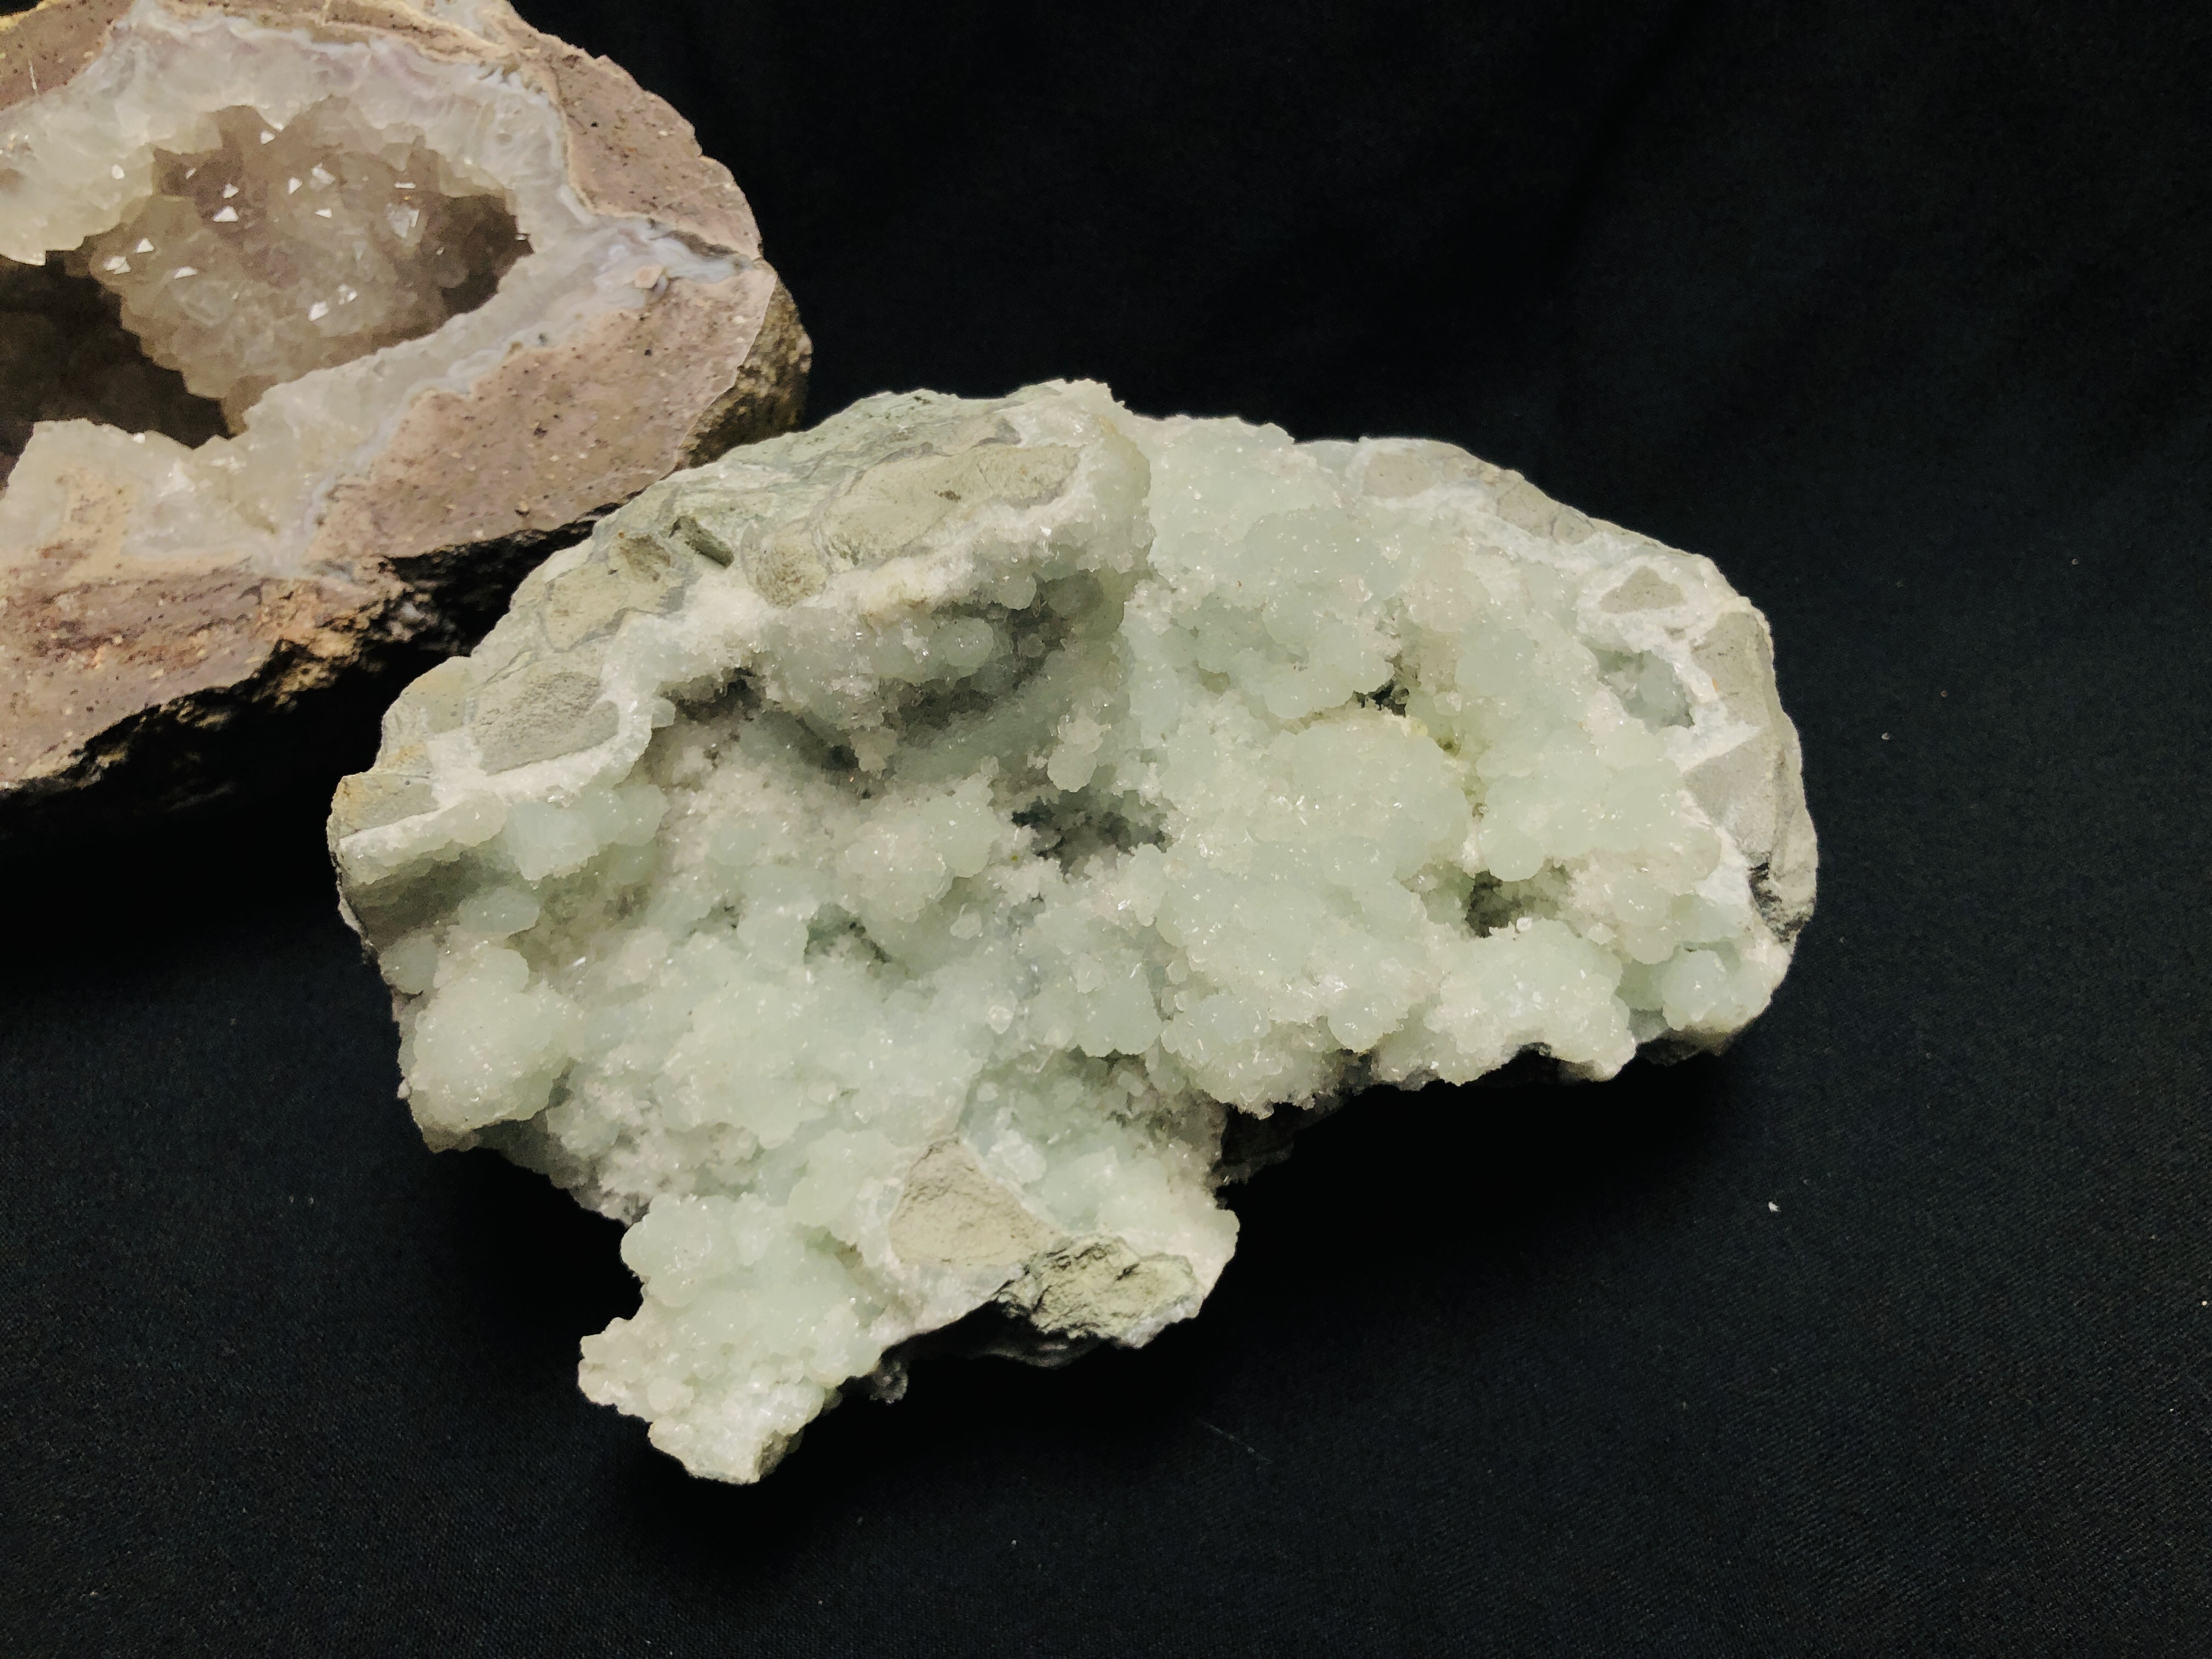 TWO IMPRESSIVE CRYSTAL AND MINERAL EXAMPLES, ONE HAVING A POLISHED SURFACE. - Image 2 of 4